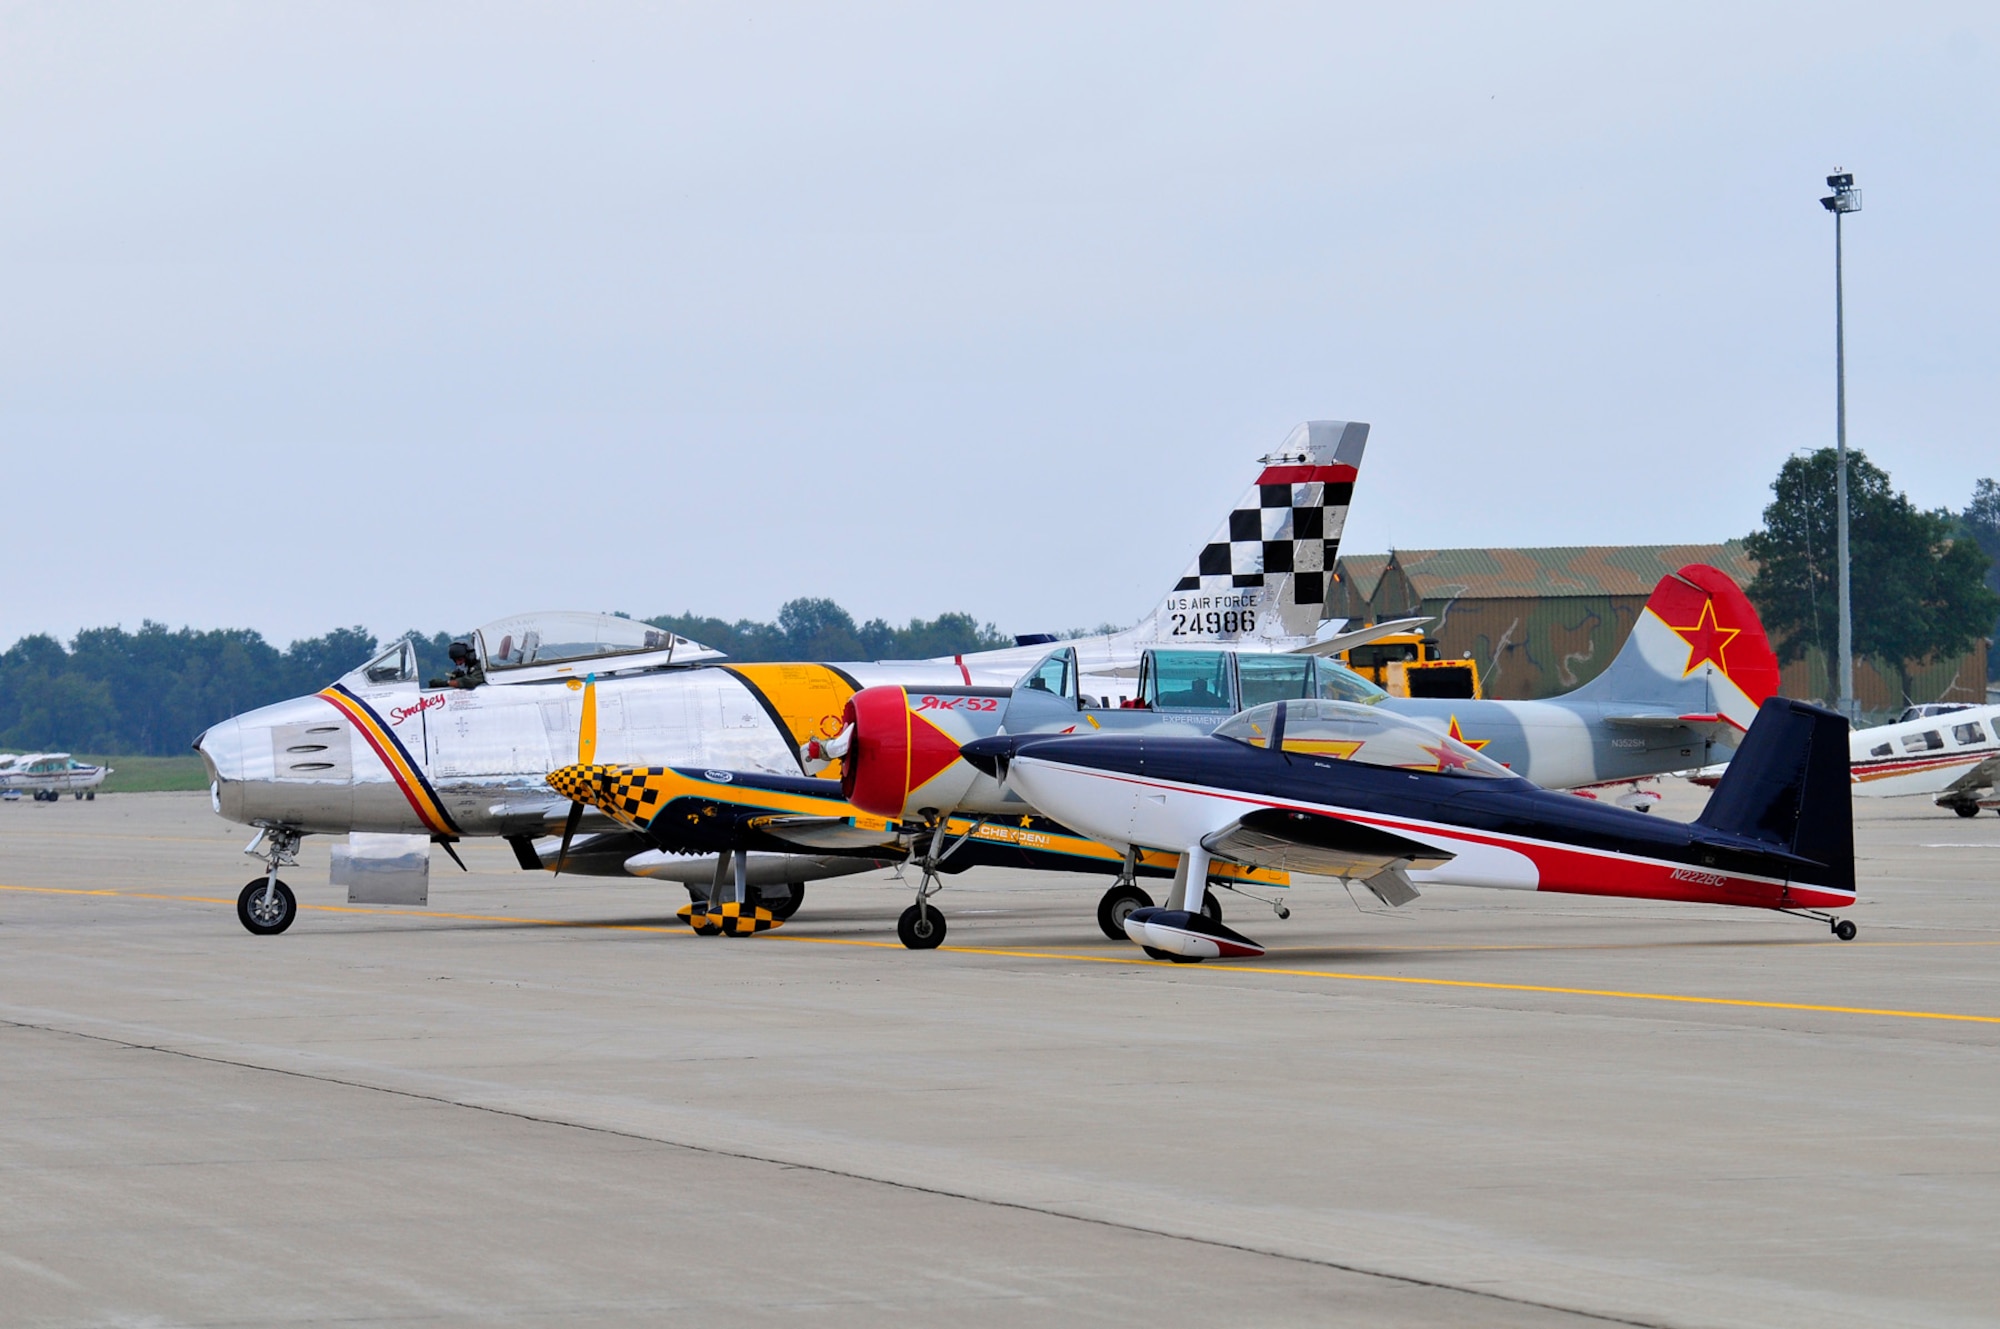 Line up of Airshow performers at Volk Field Open House, 21 Aug 2010.  (U.S. Air Force photo courtesy Joe Oliva) (RELEASED)